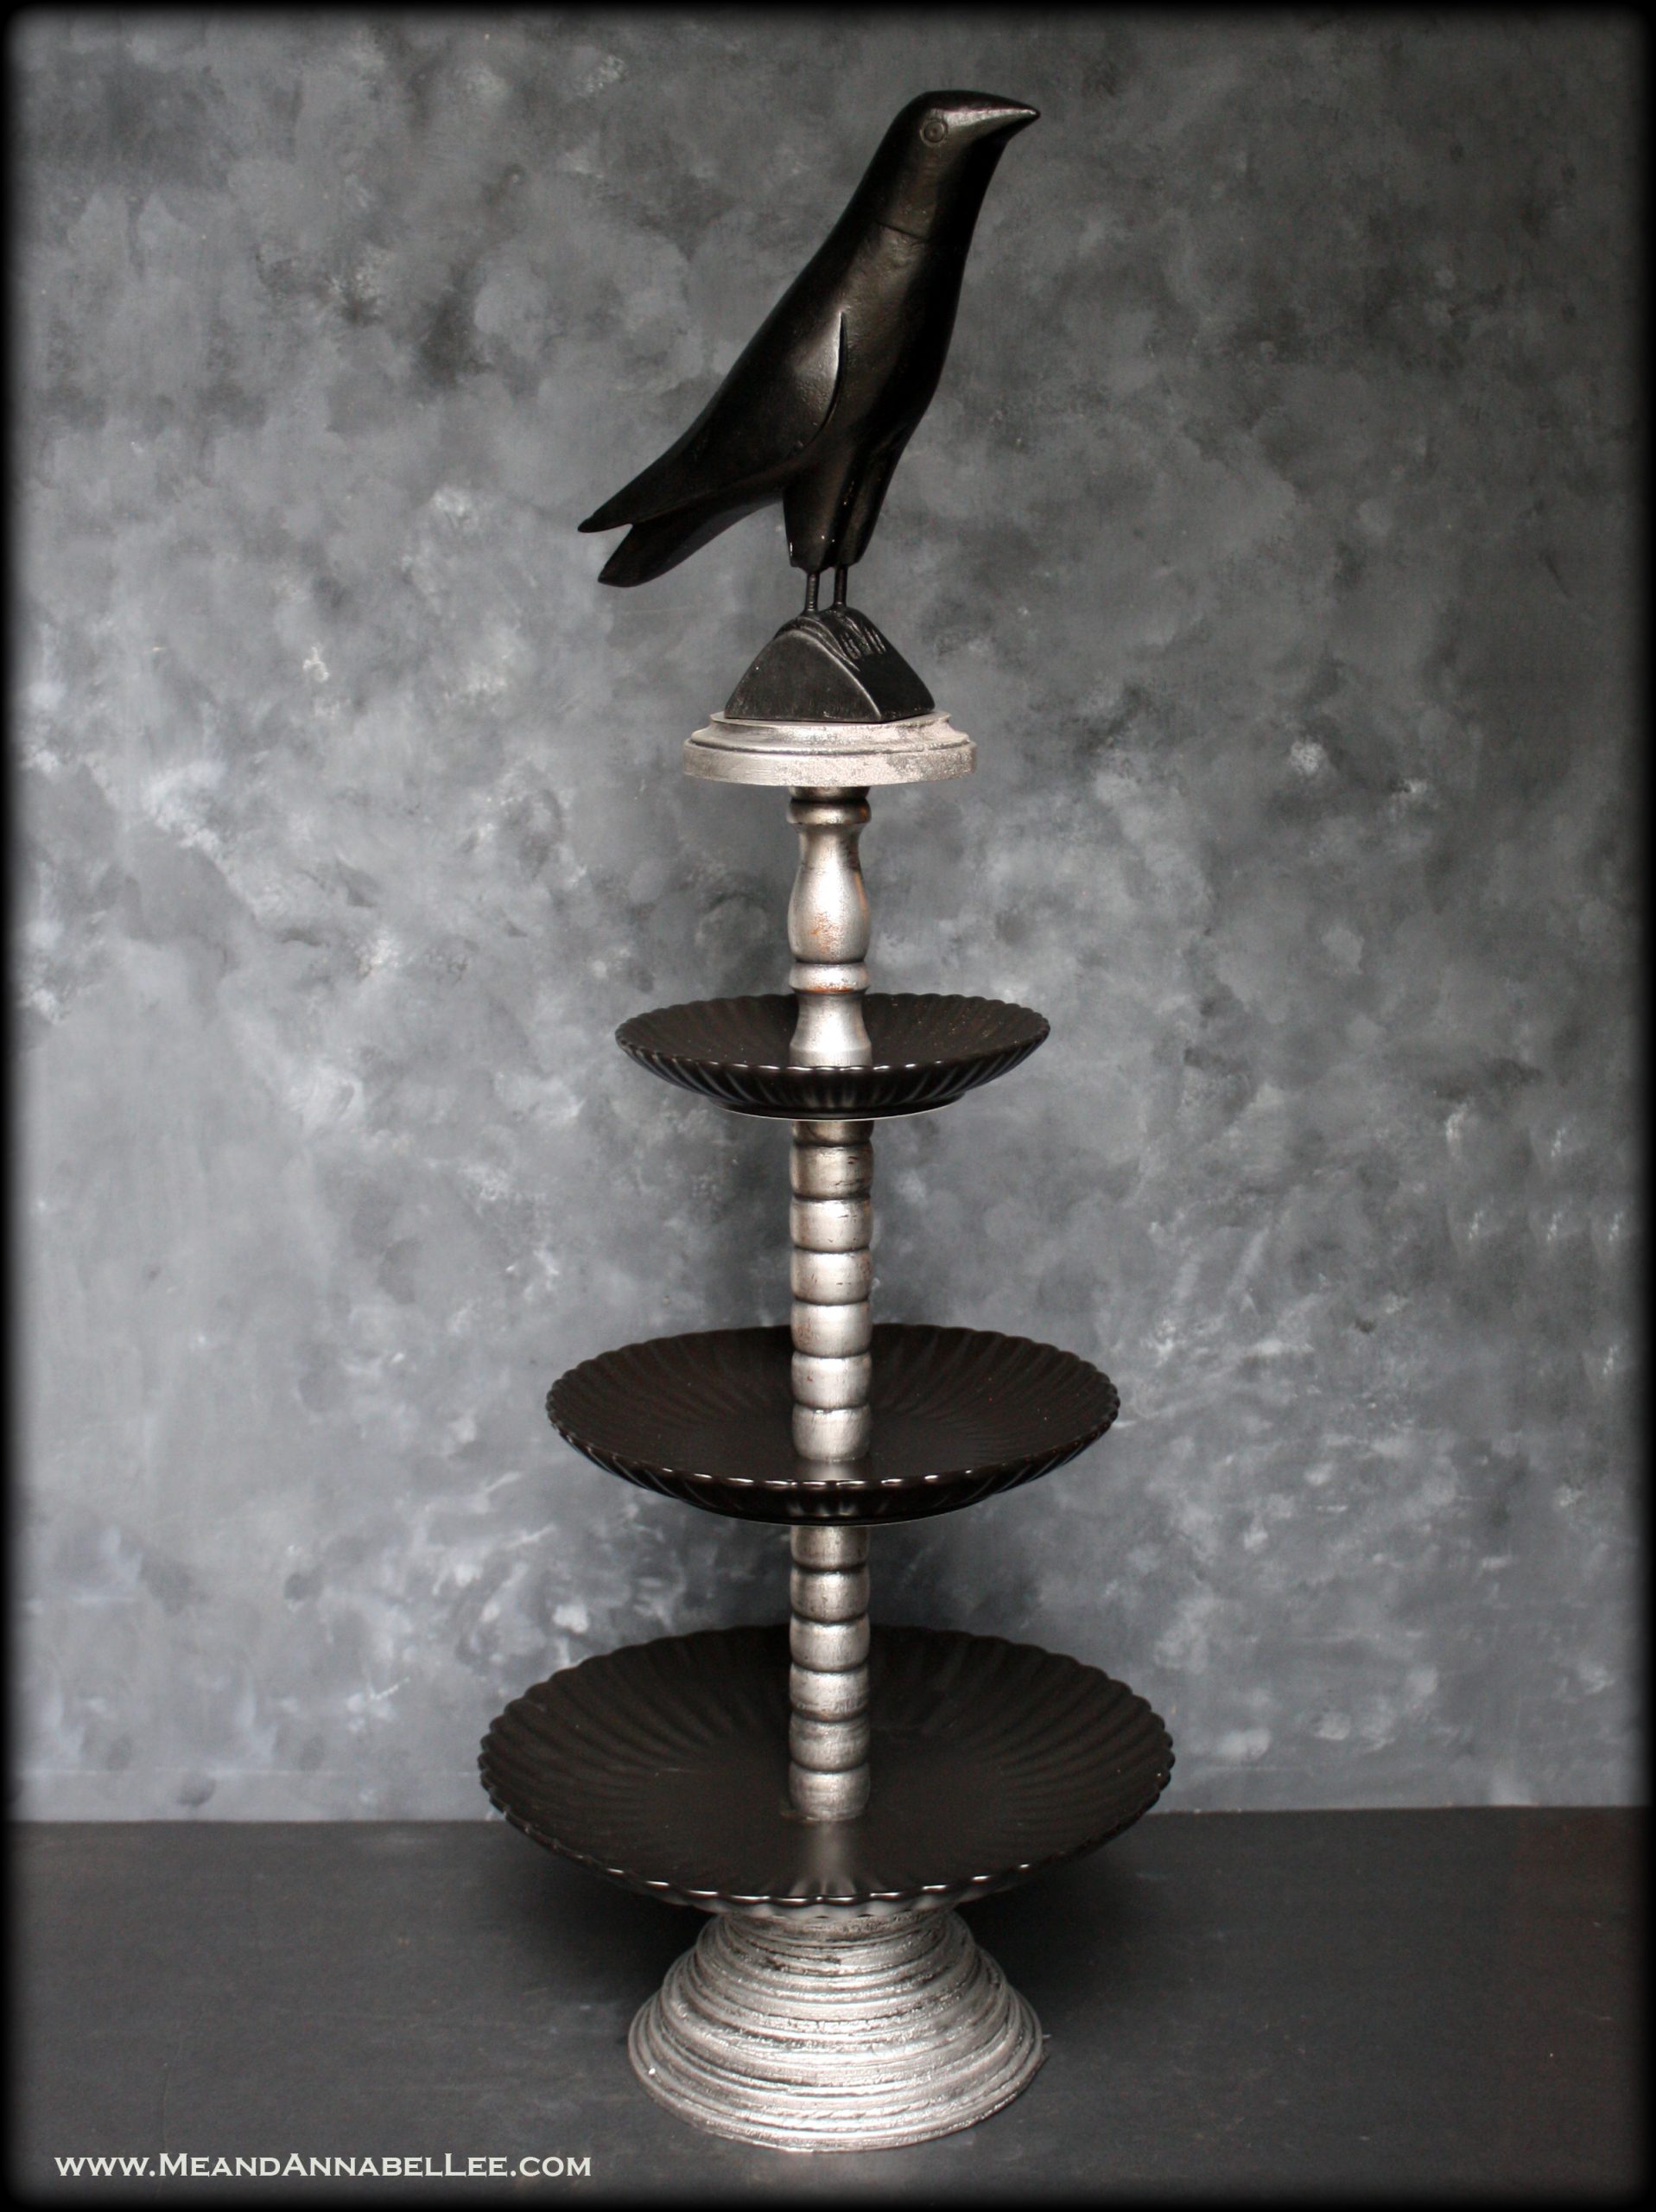 DIY Tiered Raven Halloween Serving Tray Tutorial | Gothic Server for your Halloween Party | Edgar Allan Poe The Raven | Copycat Grandin Road Halloween Decoration | Me and Annabel Lee Blog